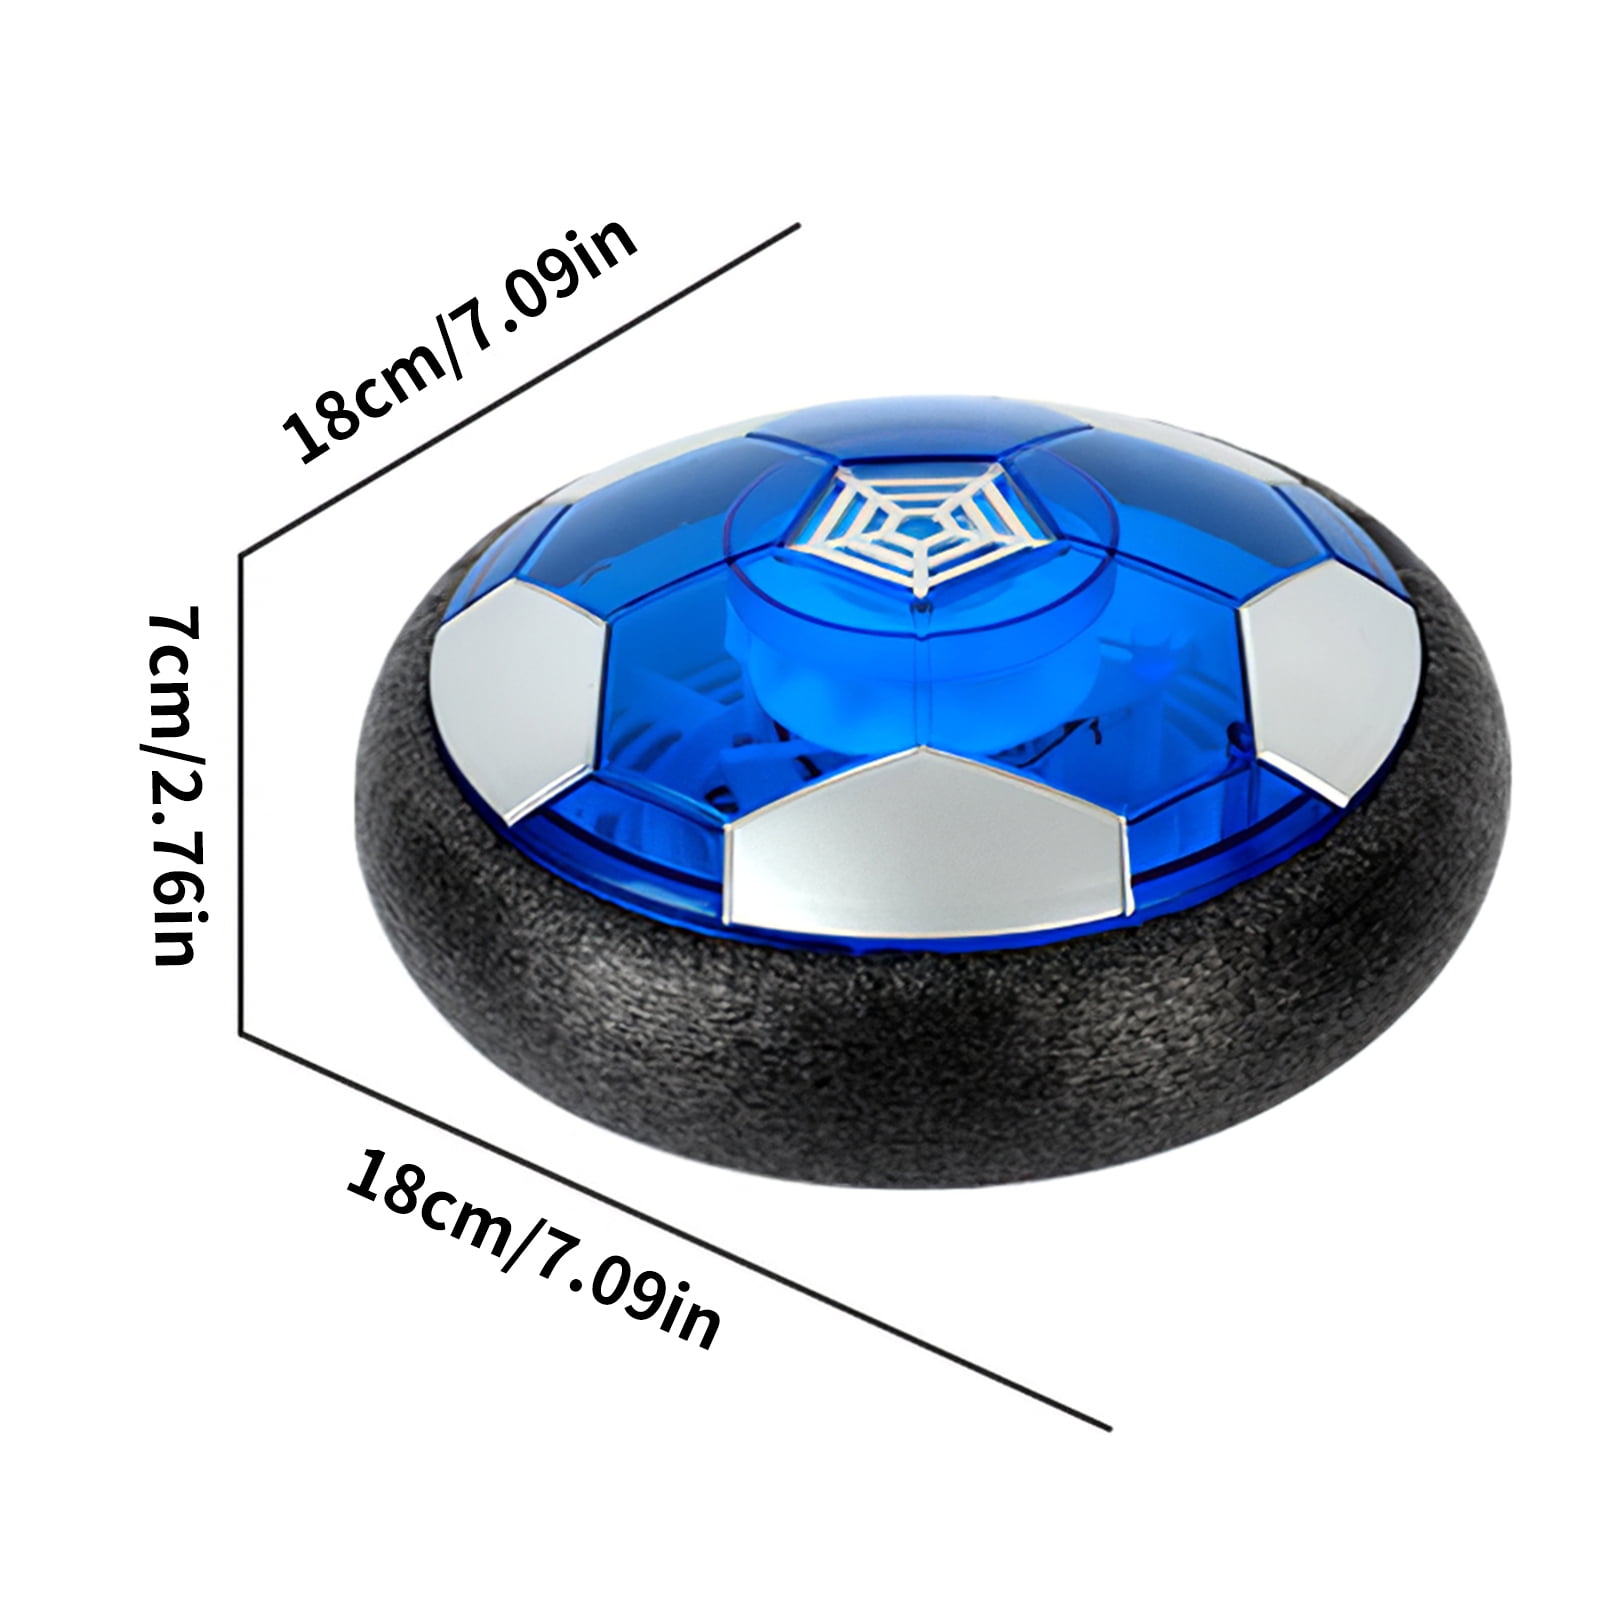 Hover Football Air Power Floating Football Rechargeable Soccer Toy with  Colorful LED Light for Children Kids aged 7-14 years old 